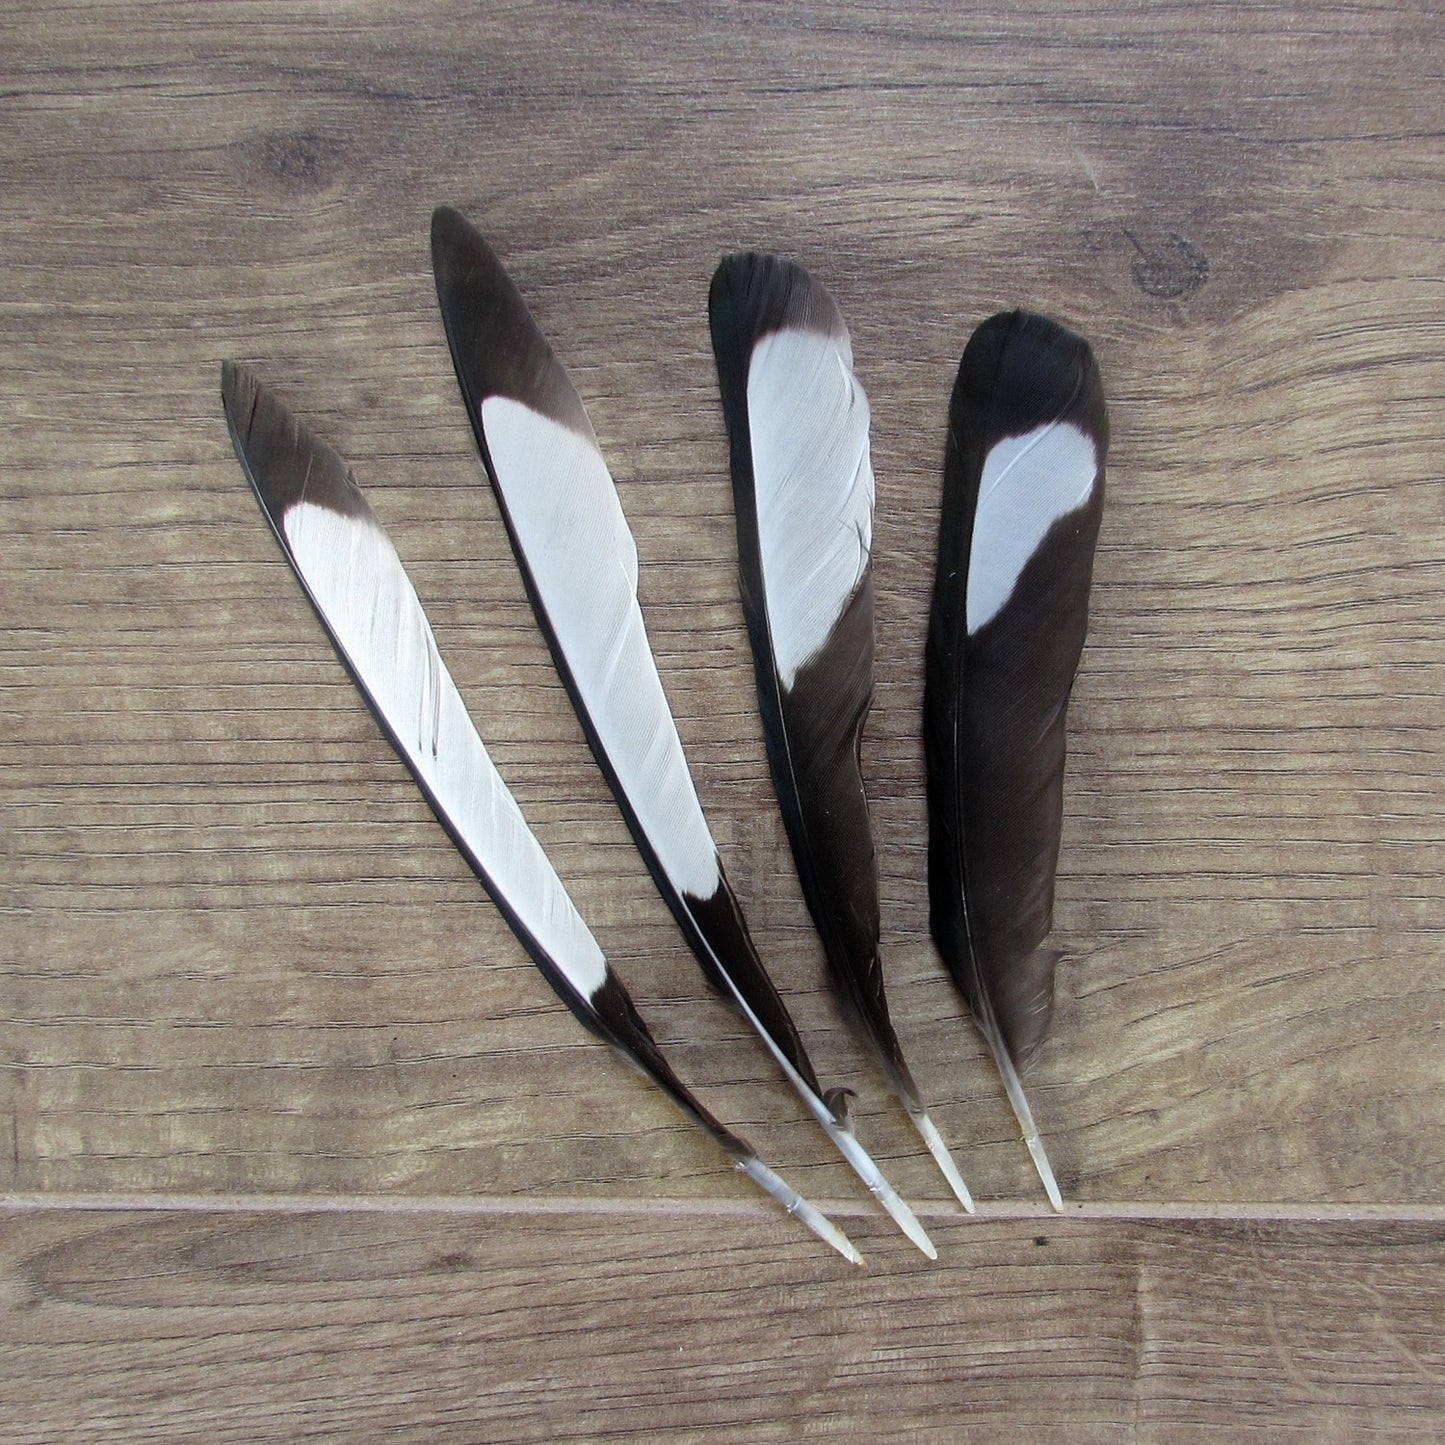 Magpie Feathers - Mixed Pack of 30